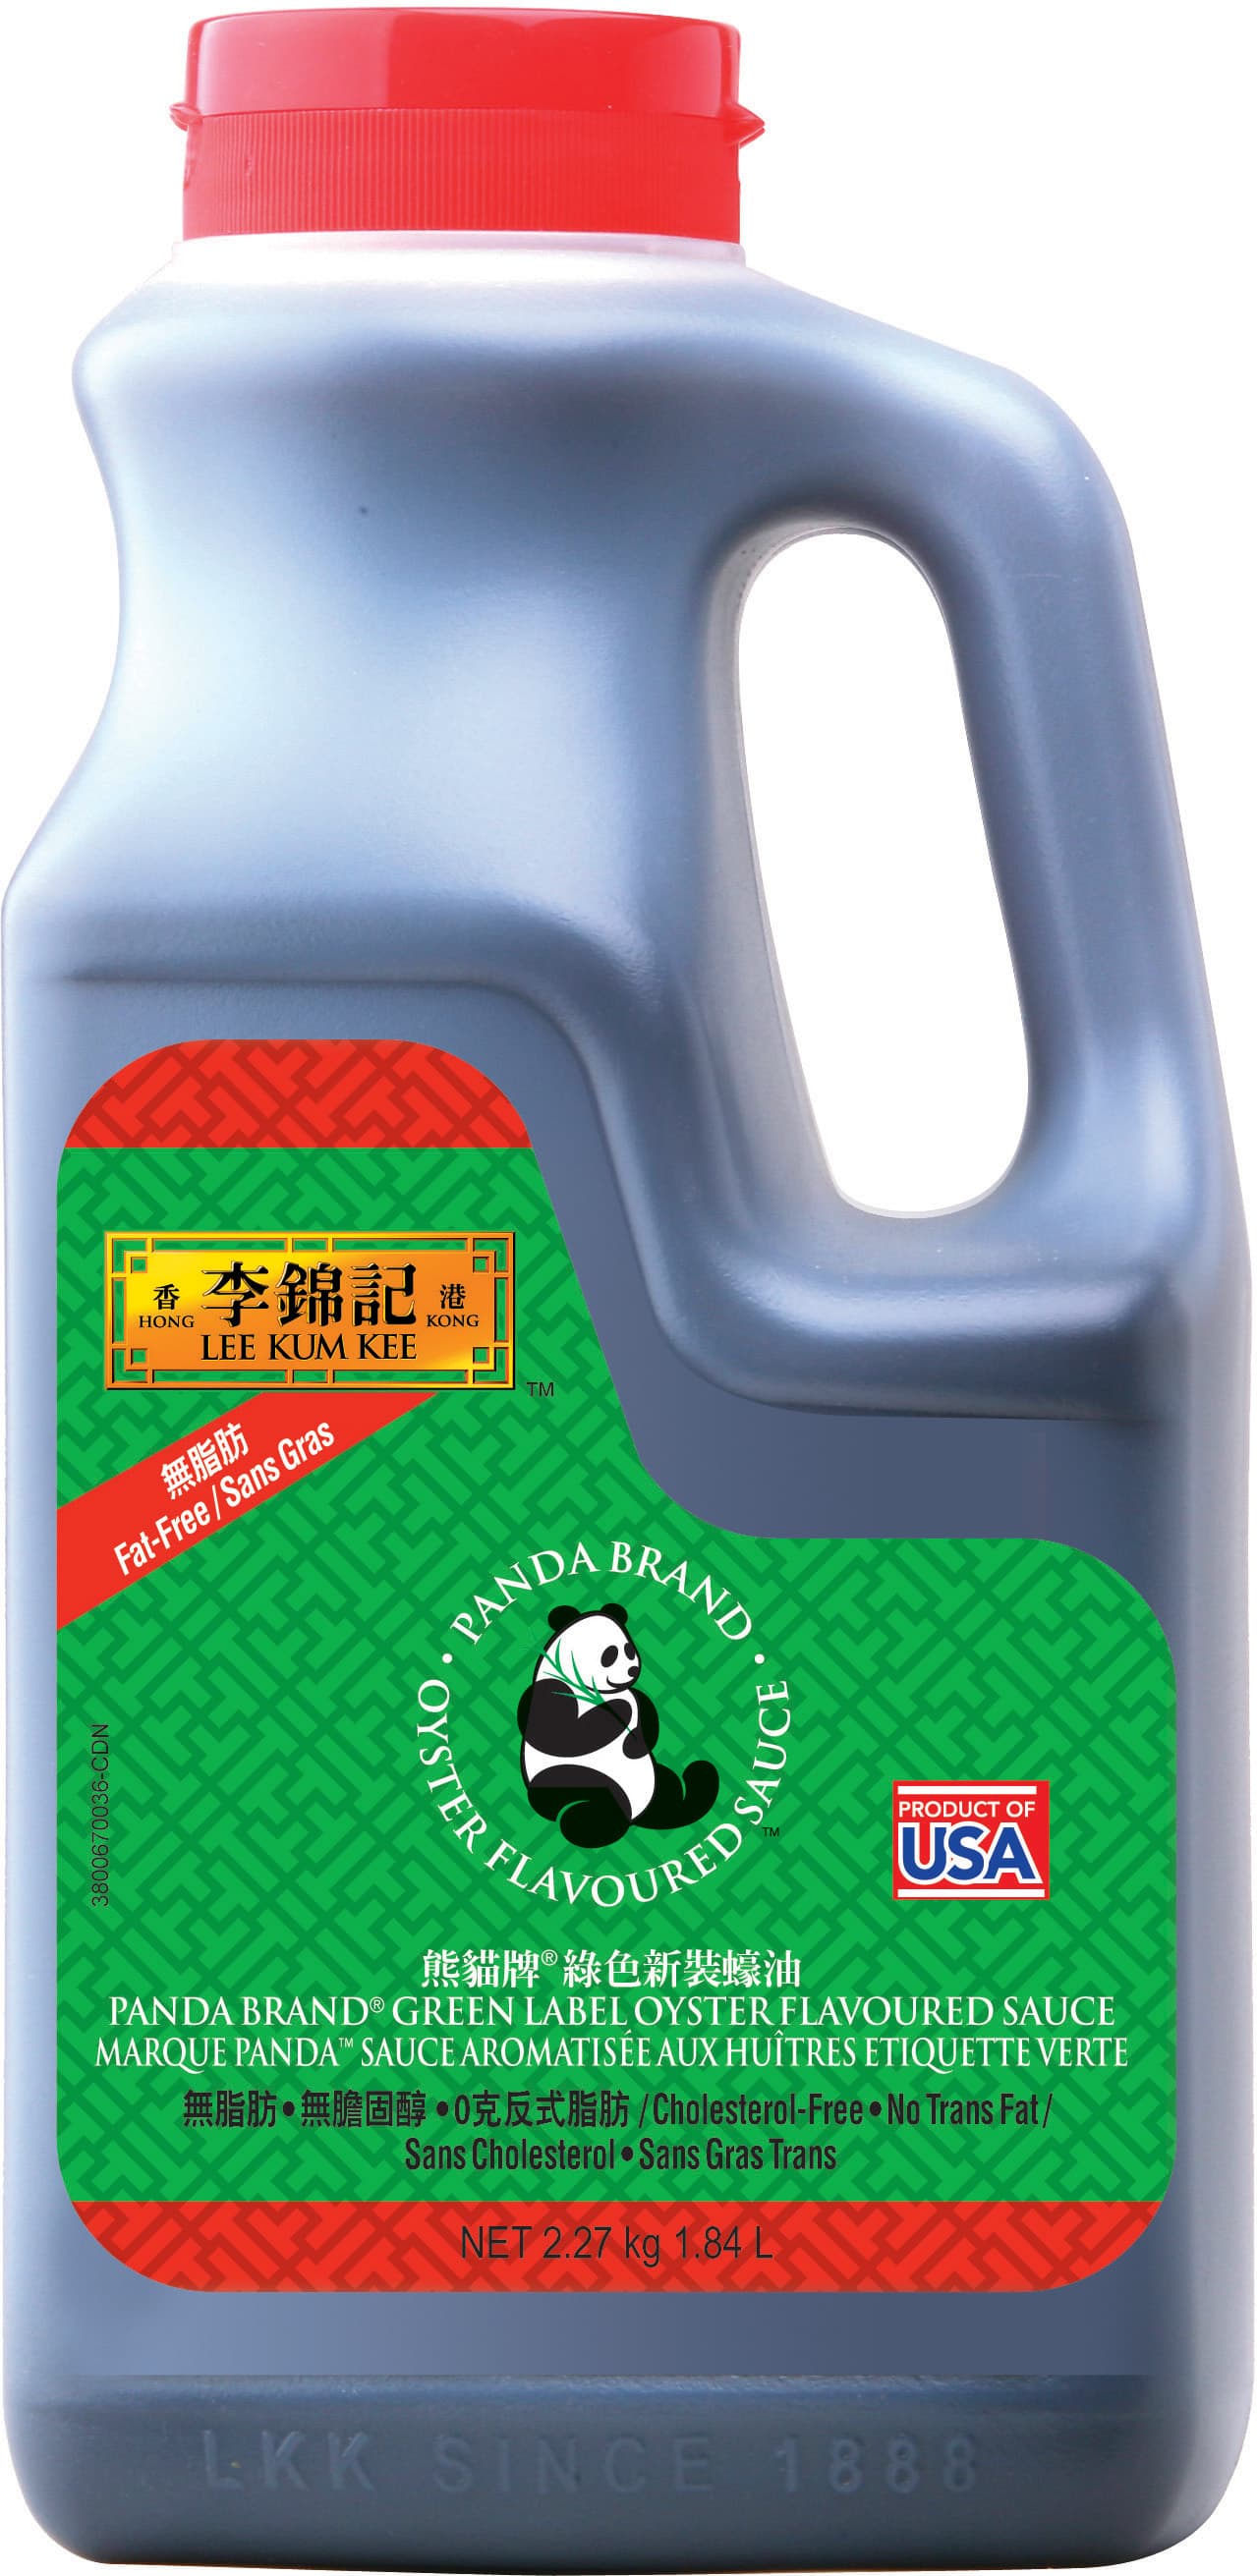 Panda Brand Green Label Oyster Flavoured Sauce 2.27kg 